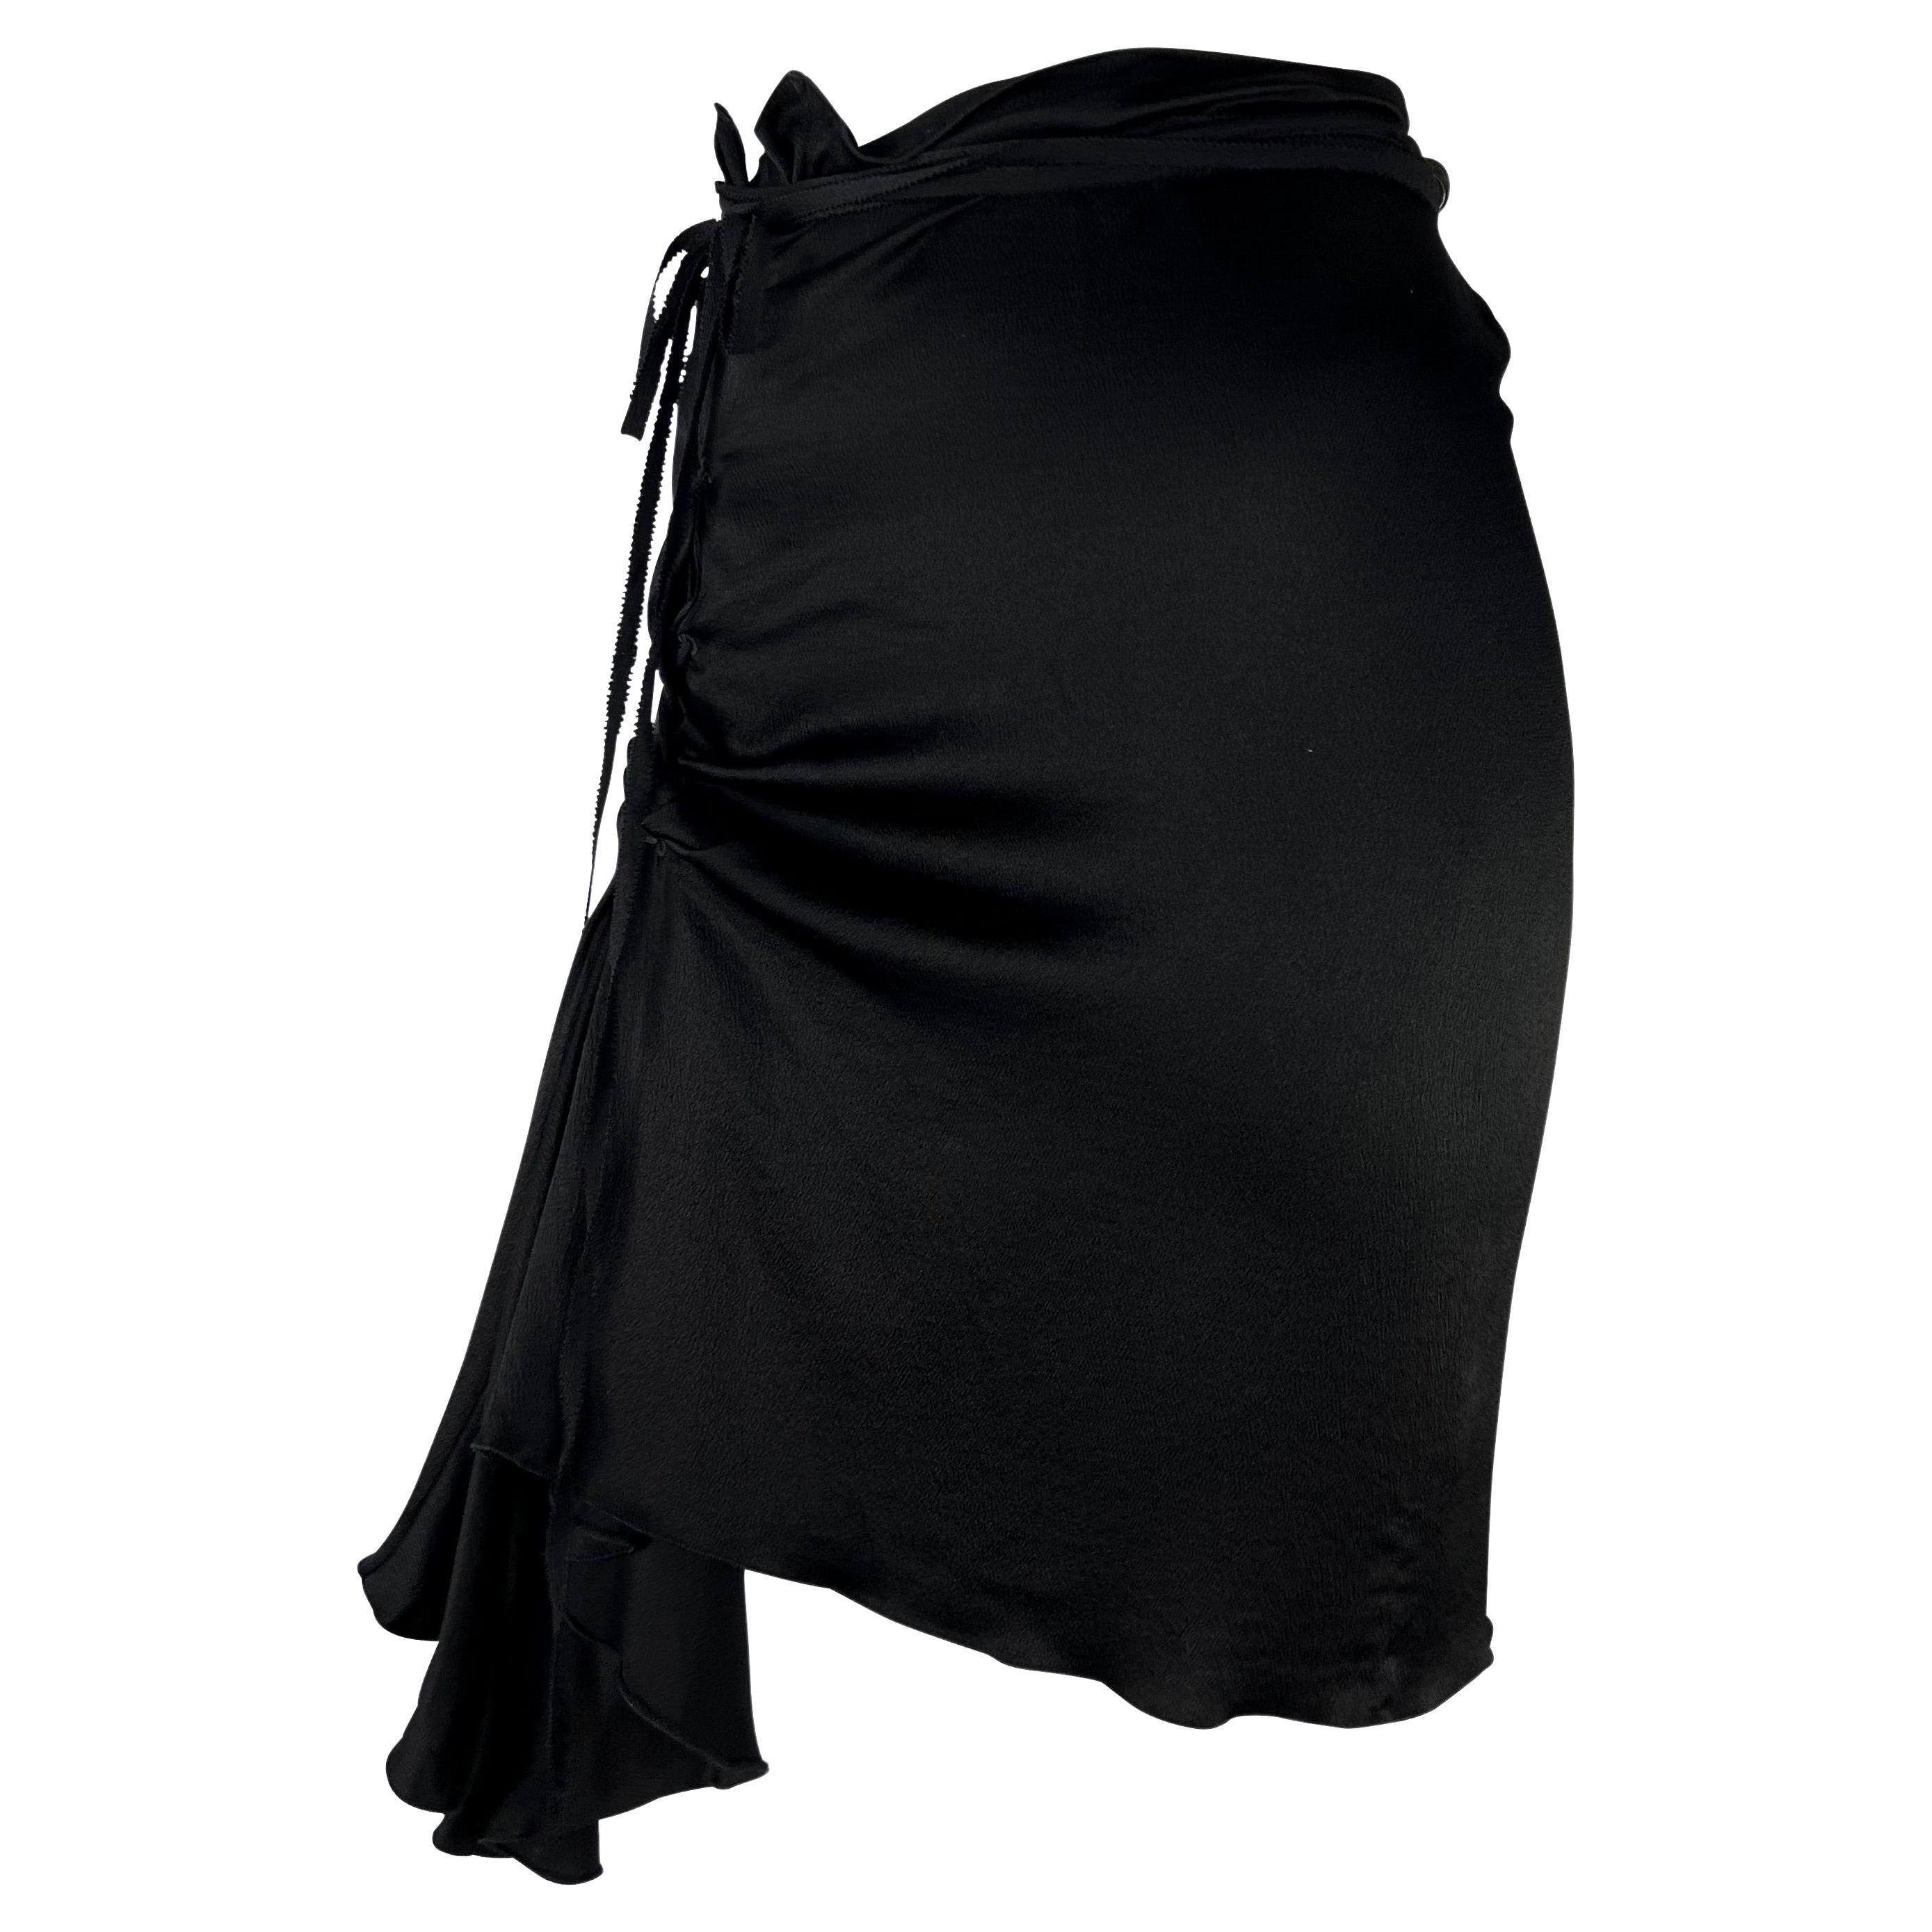 TheRealList presents: a black crepe silk Gucci skirt, designed by Tom Ford. From the Fall/Winter 2002 collection, this skirt is constructed entirely of crepe silk and features an asymmetric lace-up detail at the front which can be wrapped around the